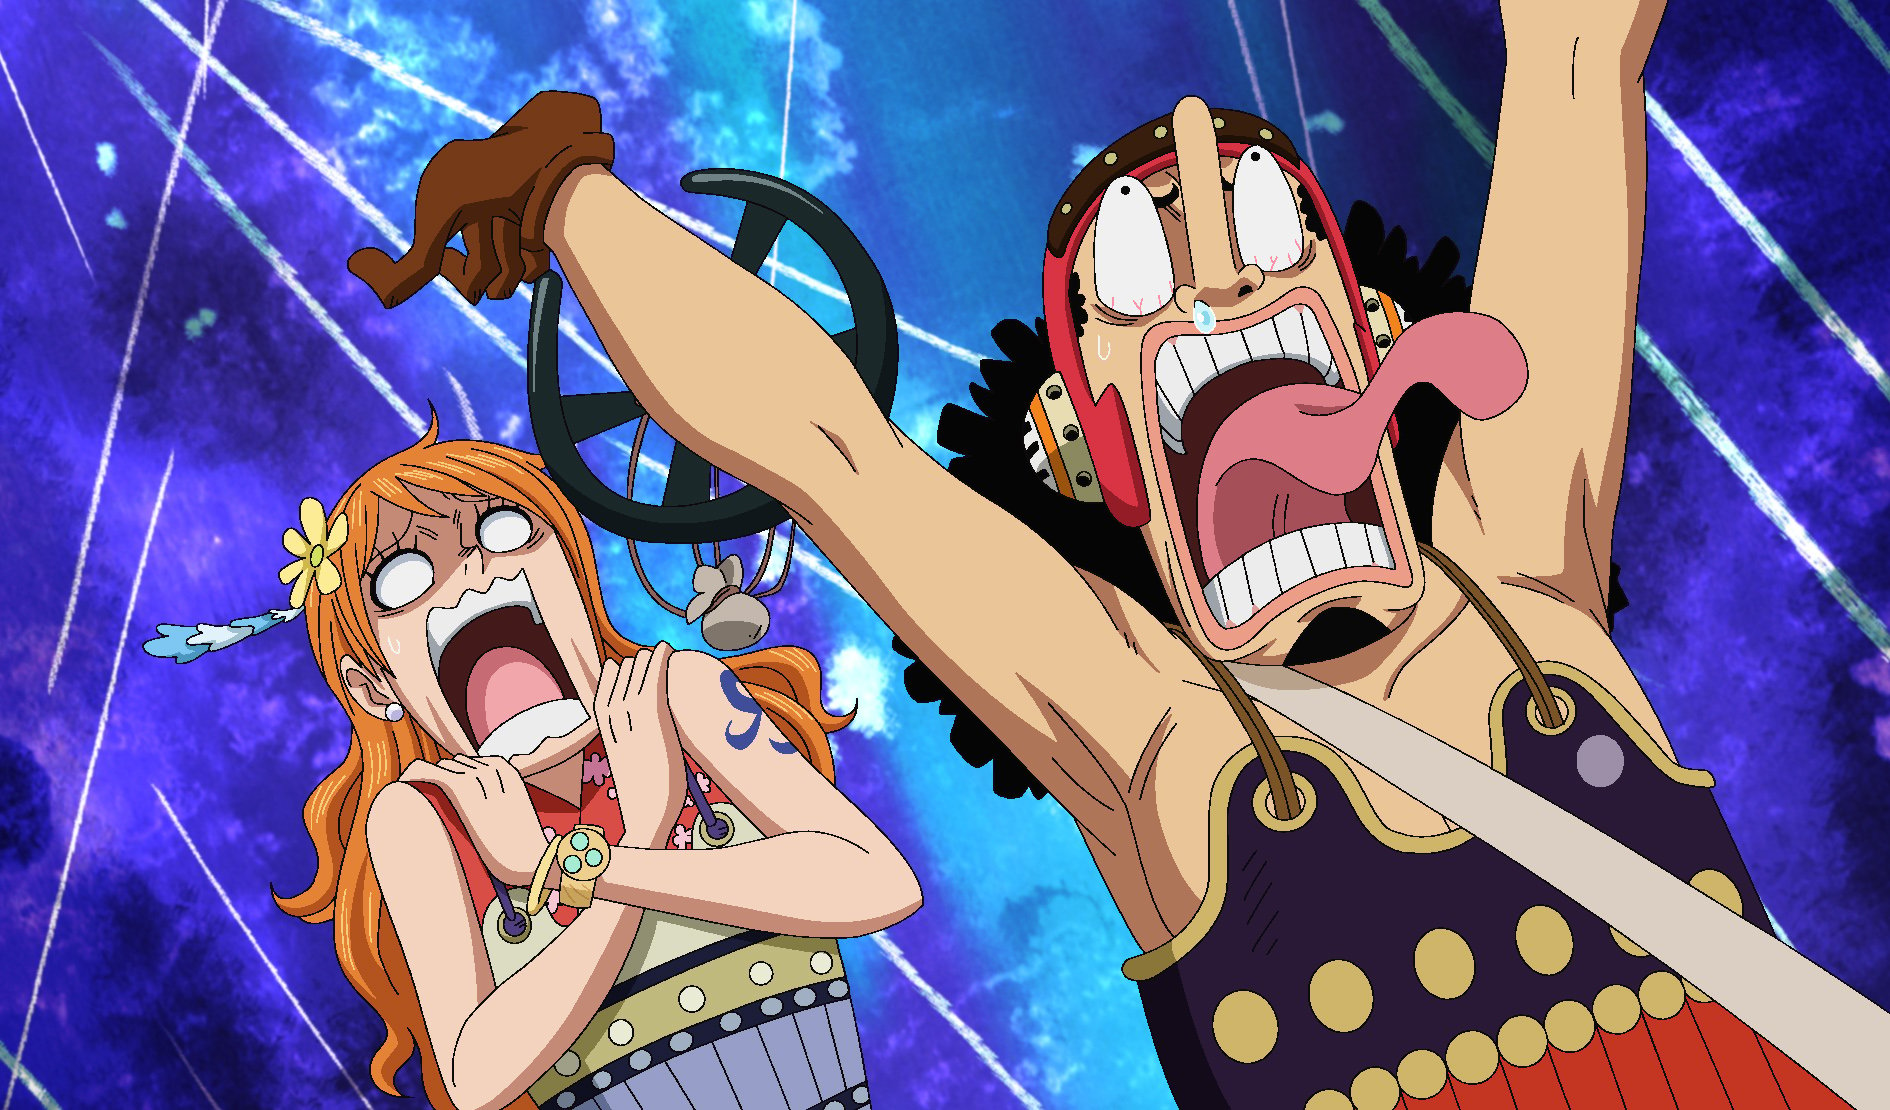 Usopp and Nami reacting in cartoonish manner, which is how you'll react while reading One Piece 1056 spoilers